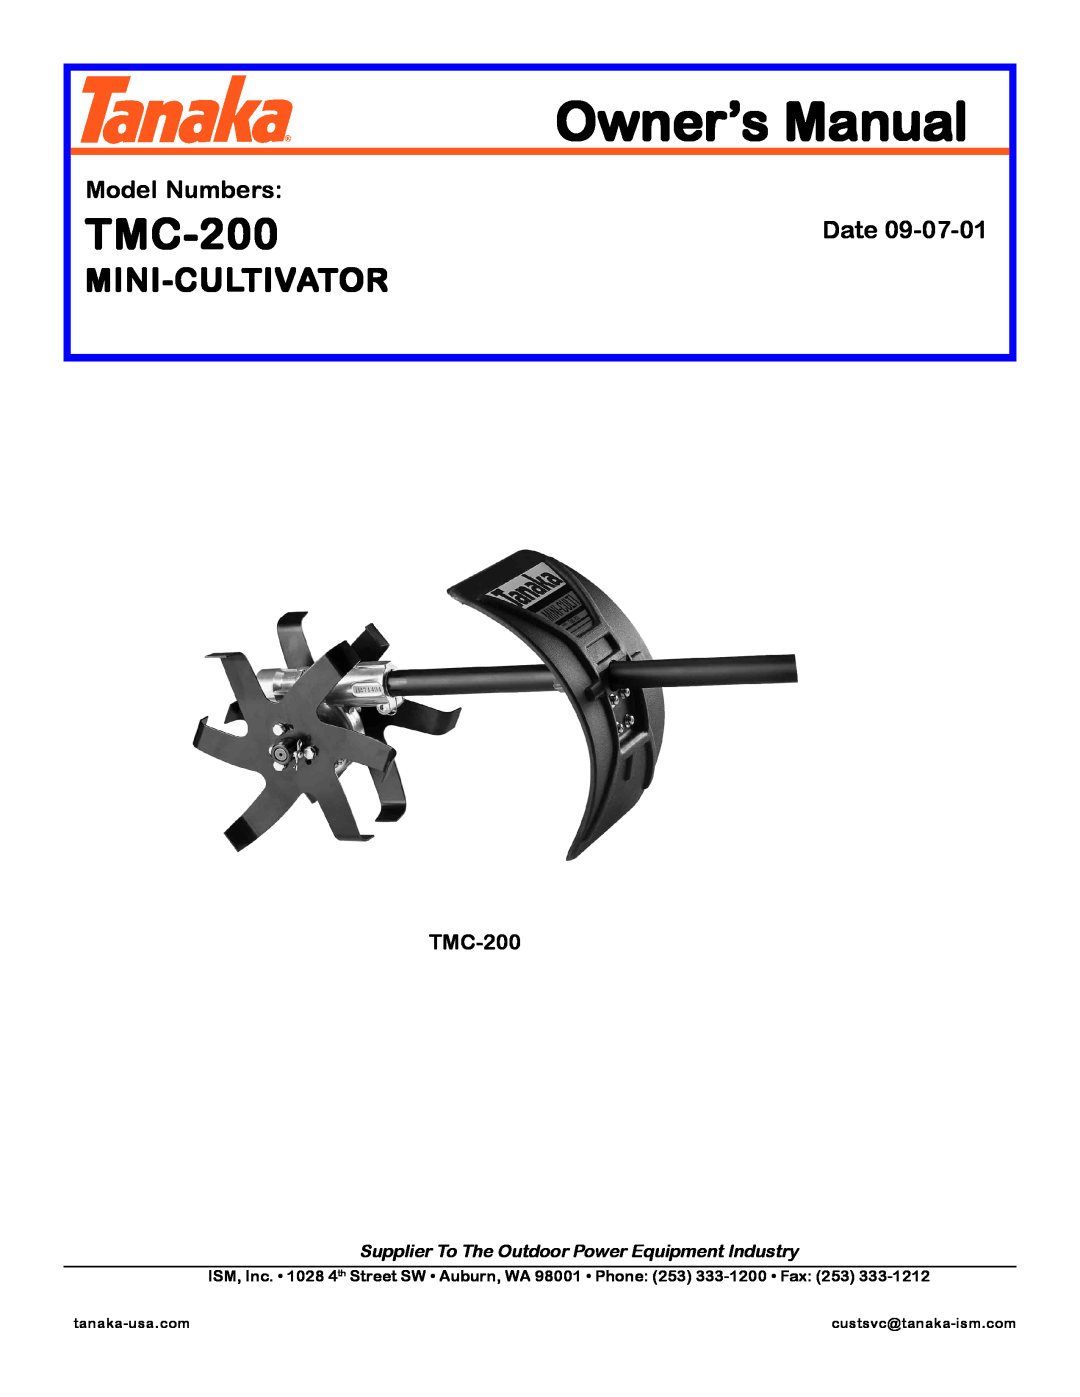 Tanaka TMC-200 manual Mini-Cultivator, Model Numbers, Date, Supplier To The Outdoor Power Equipment Industry 